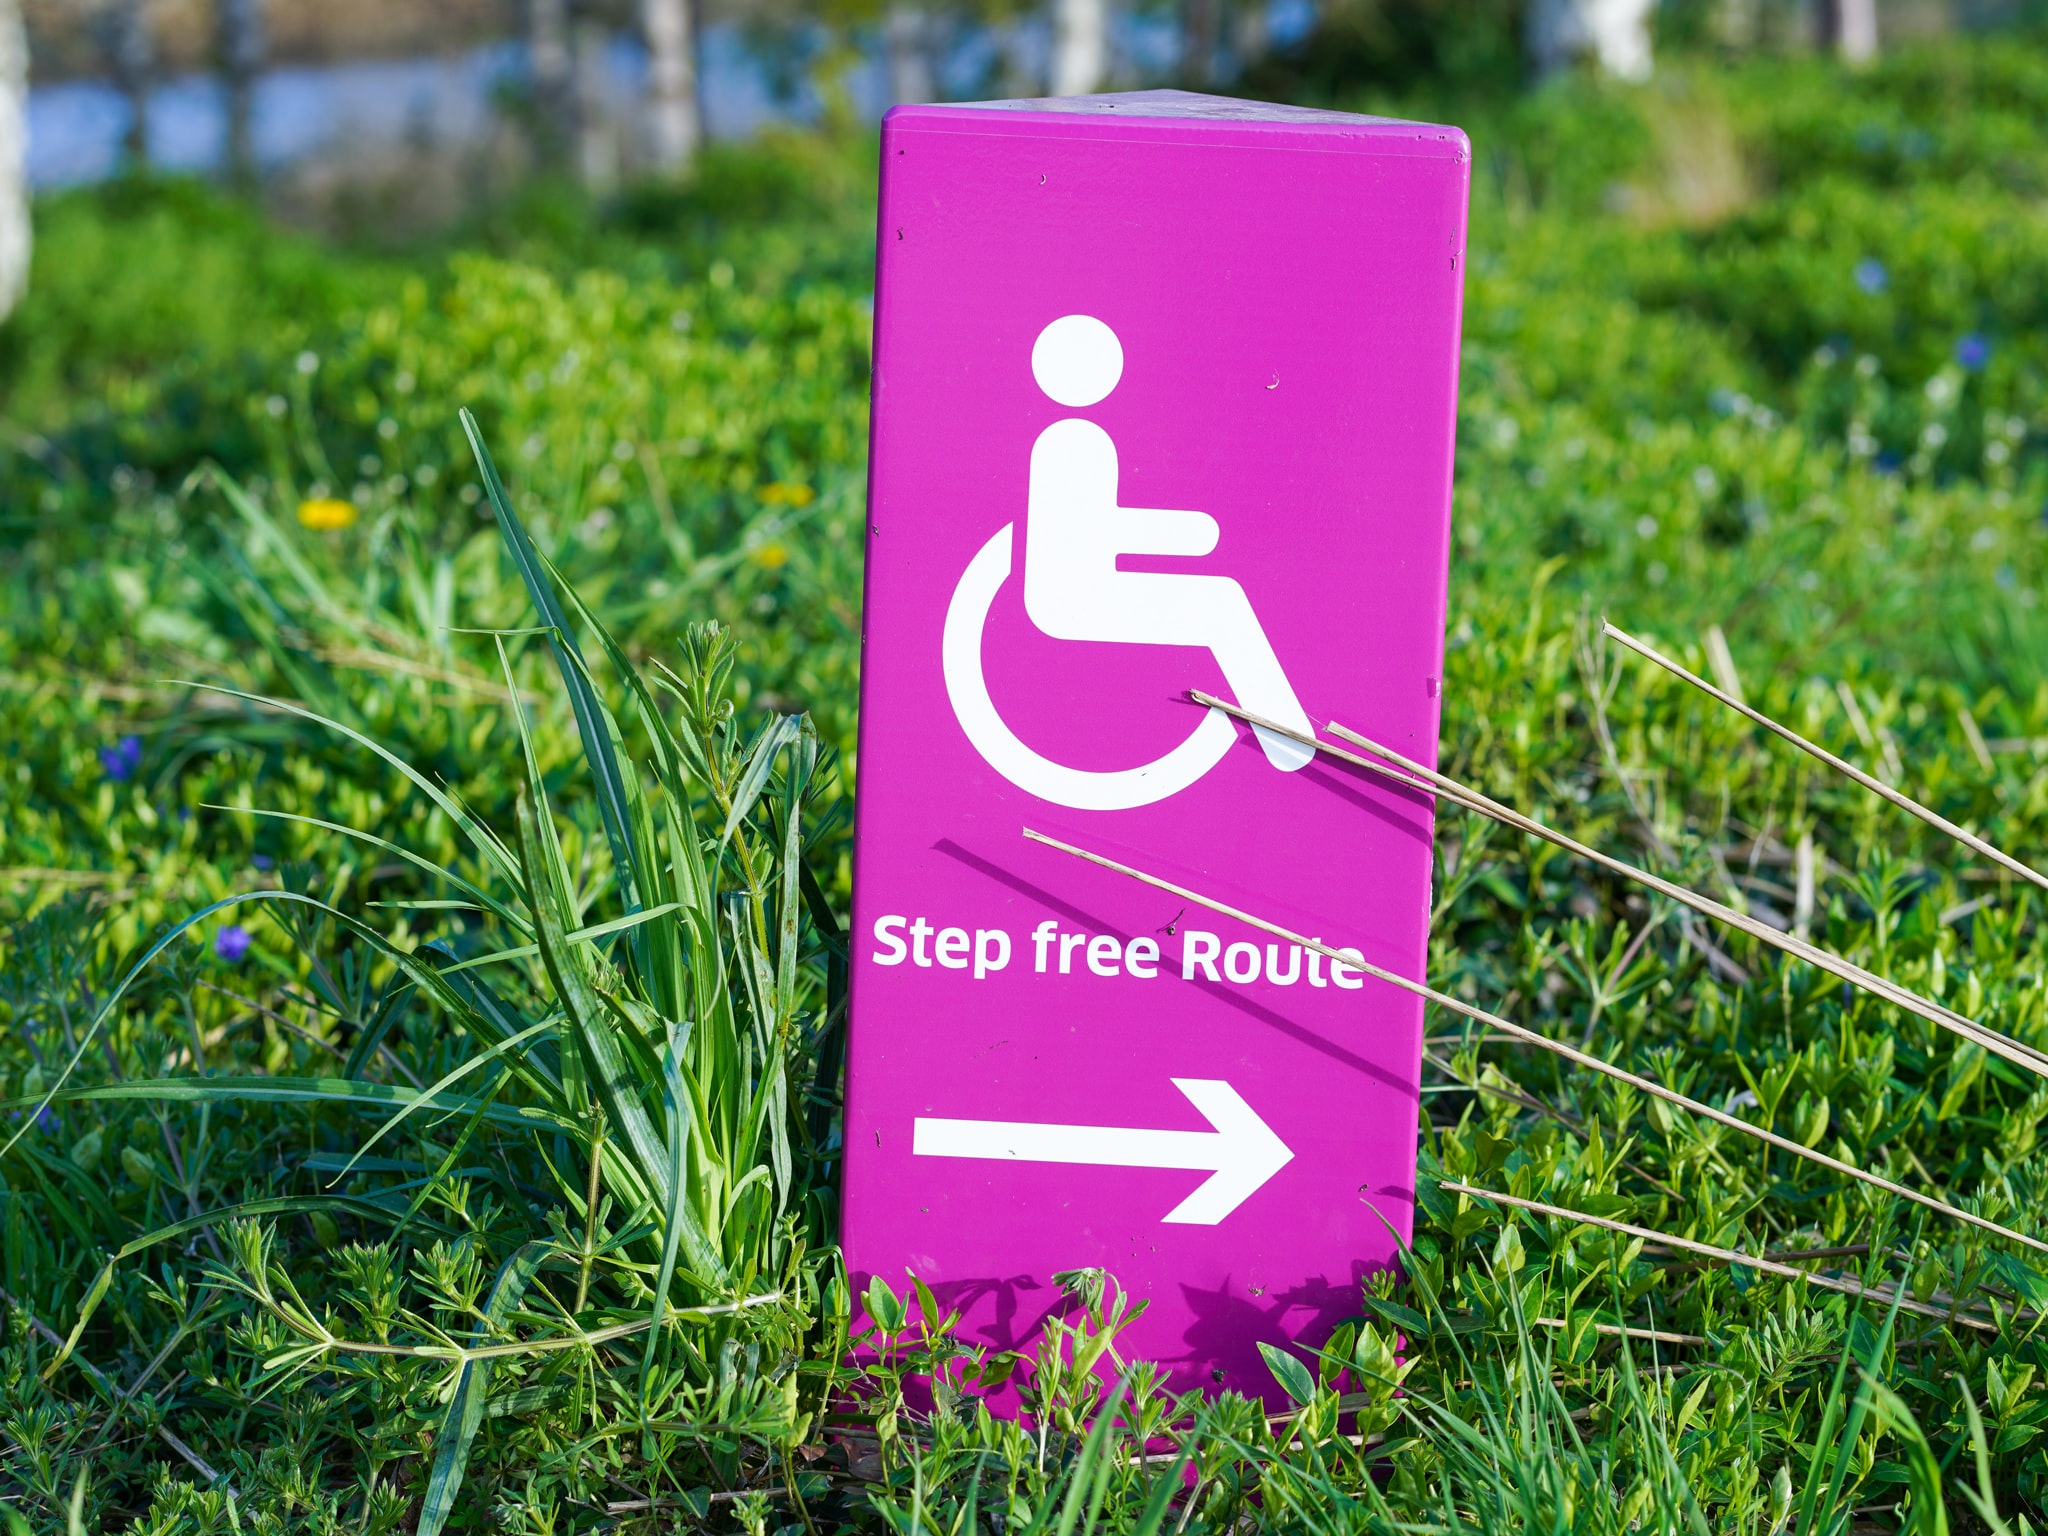 How To Make Life Easier For People With Disabilities